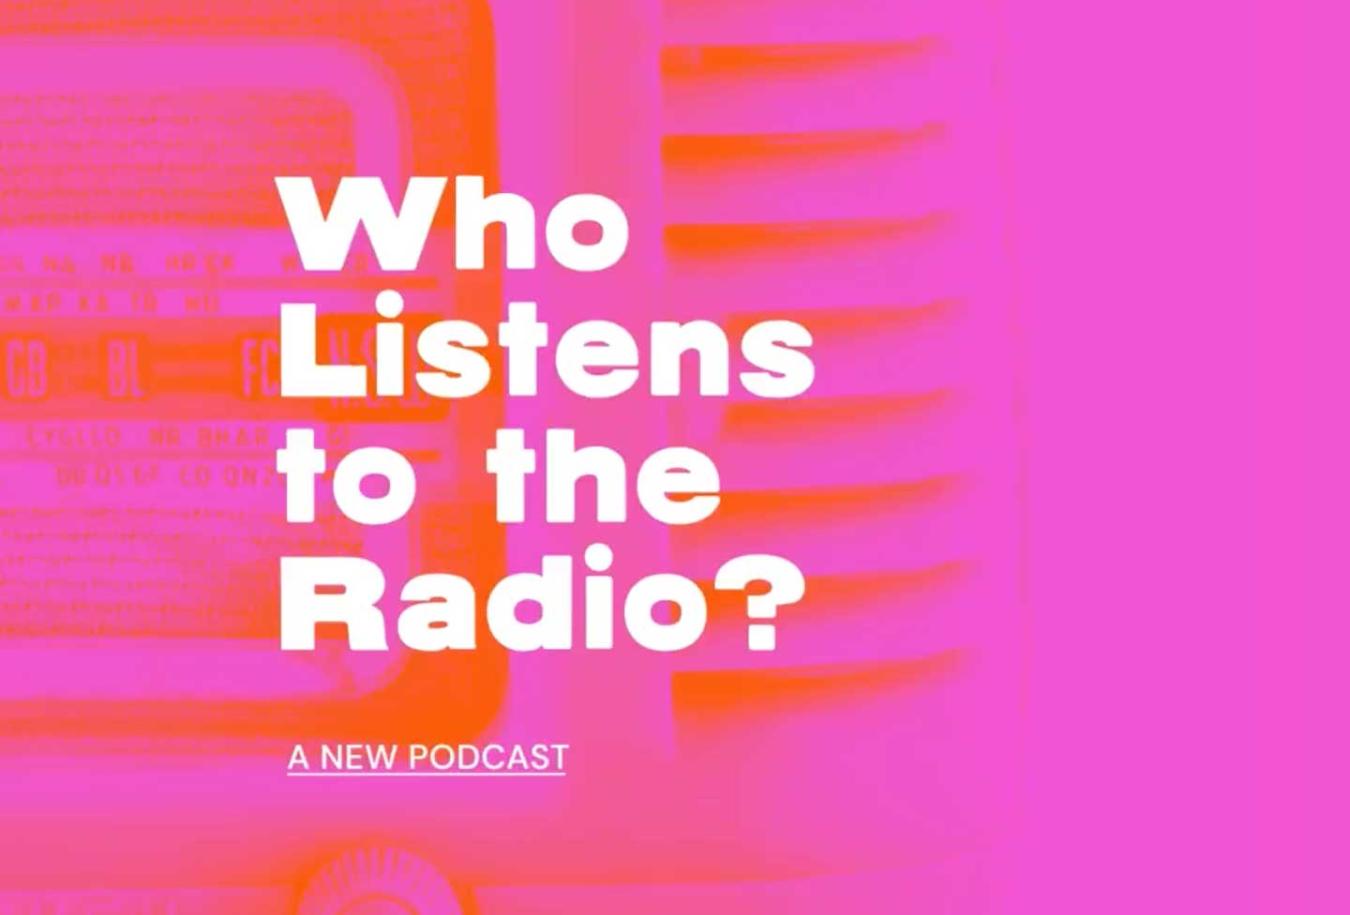 A bright orange and pink graphic background image with white text that says Who Listens to the Radio?